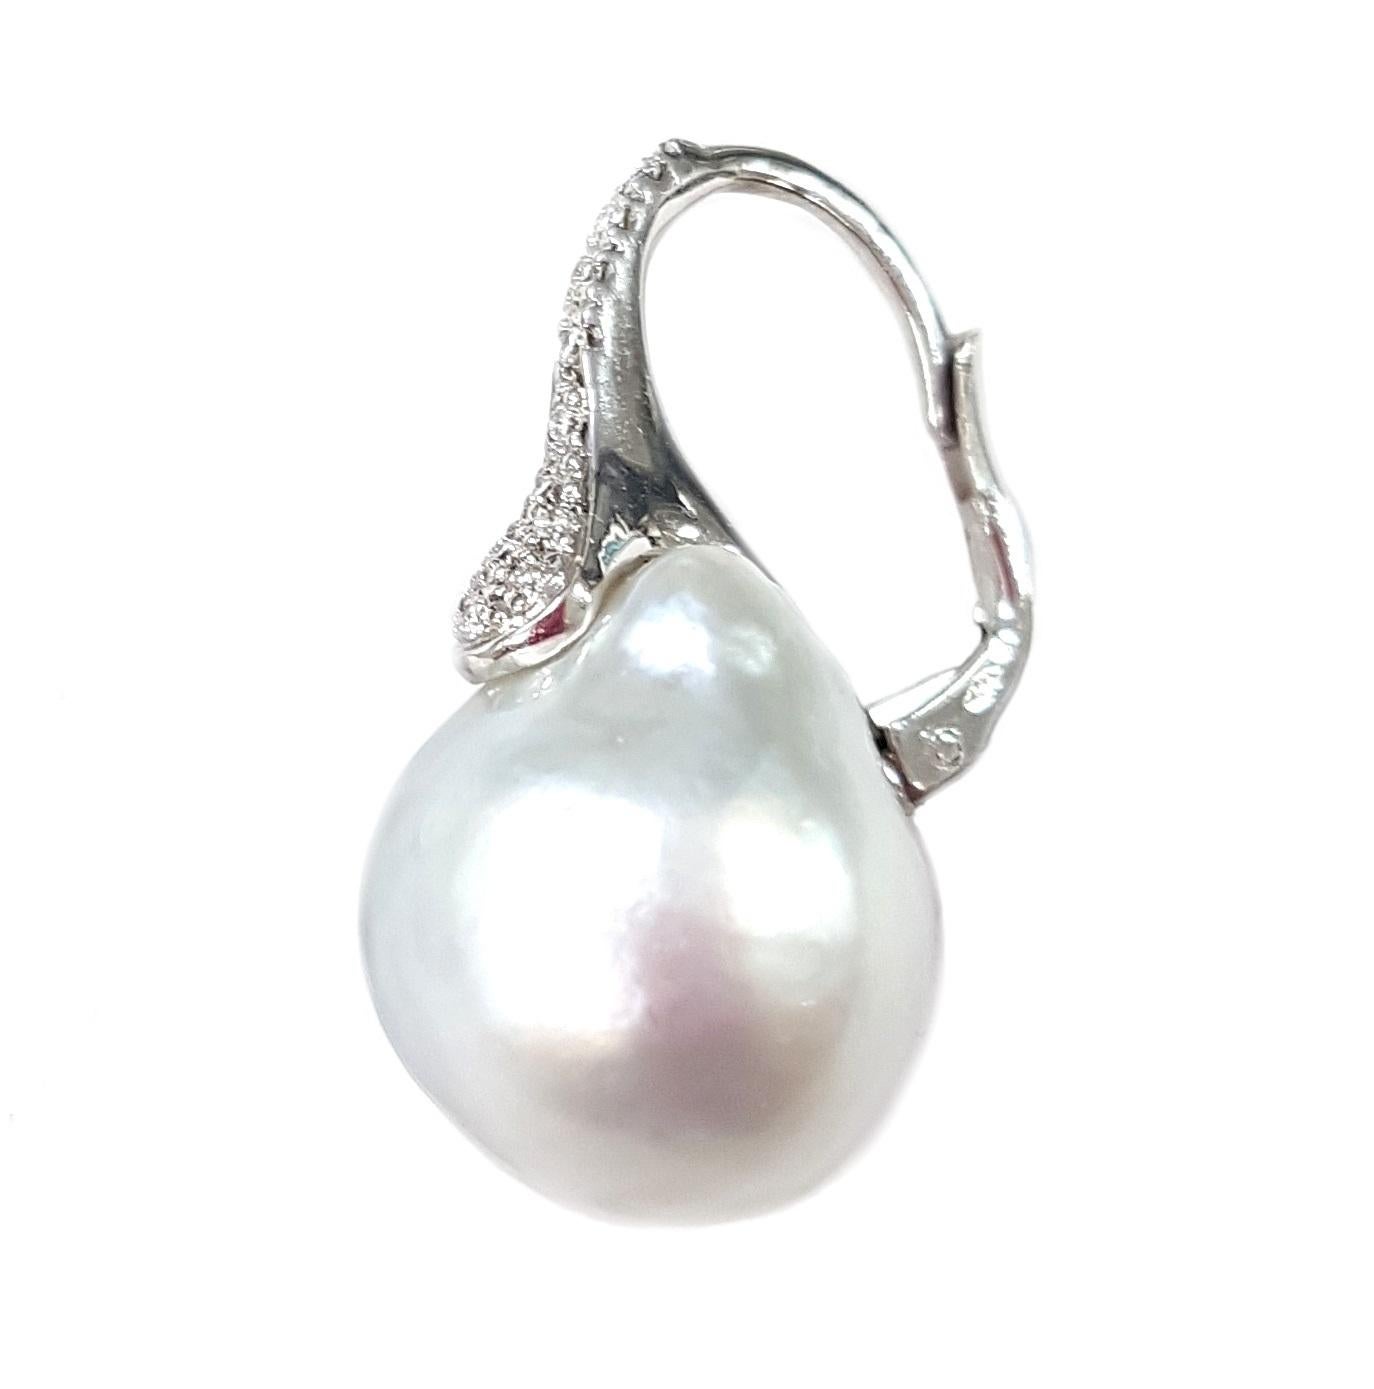 39.05 Carat Pearl and Diamond Drop Earrings in 18-Karat White Gold In New Condition For Sale In Palermo, Italy PA